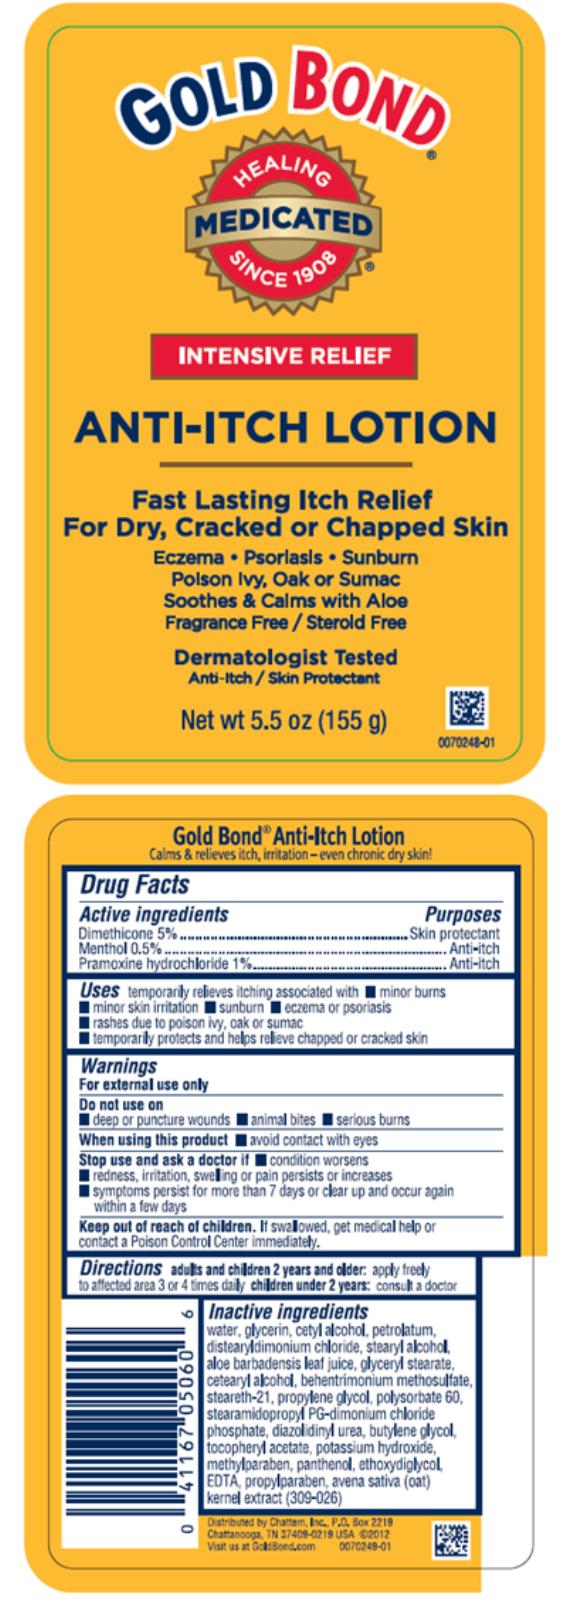 GOLD BOND® 
Healing Medicated
Since 1908
Intensive Relief
ANTI-ITCH LOTION
Net wt 5.5 oz (155 g)
